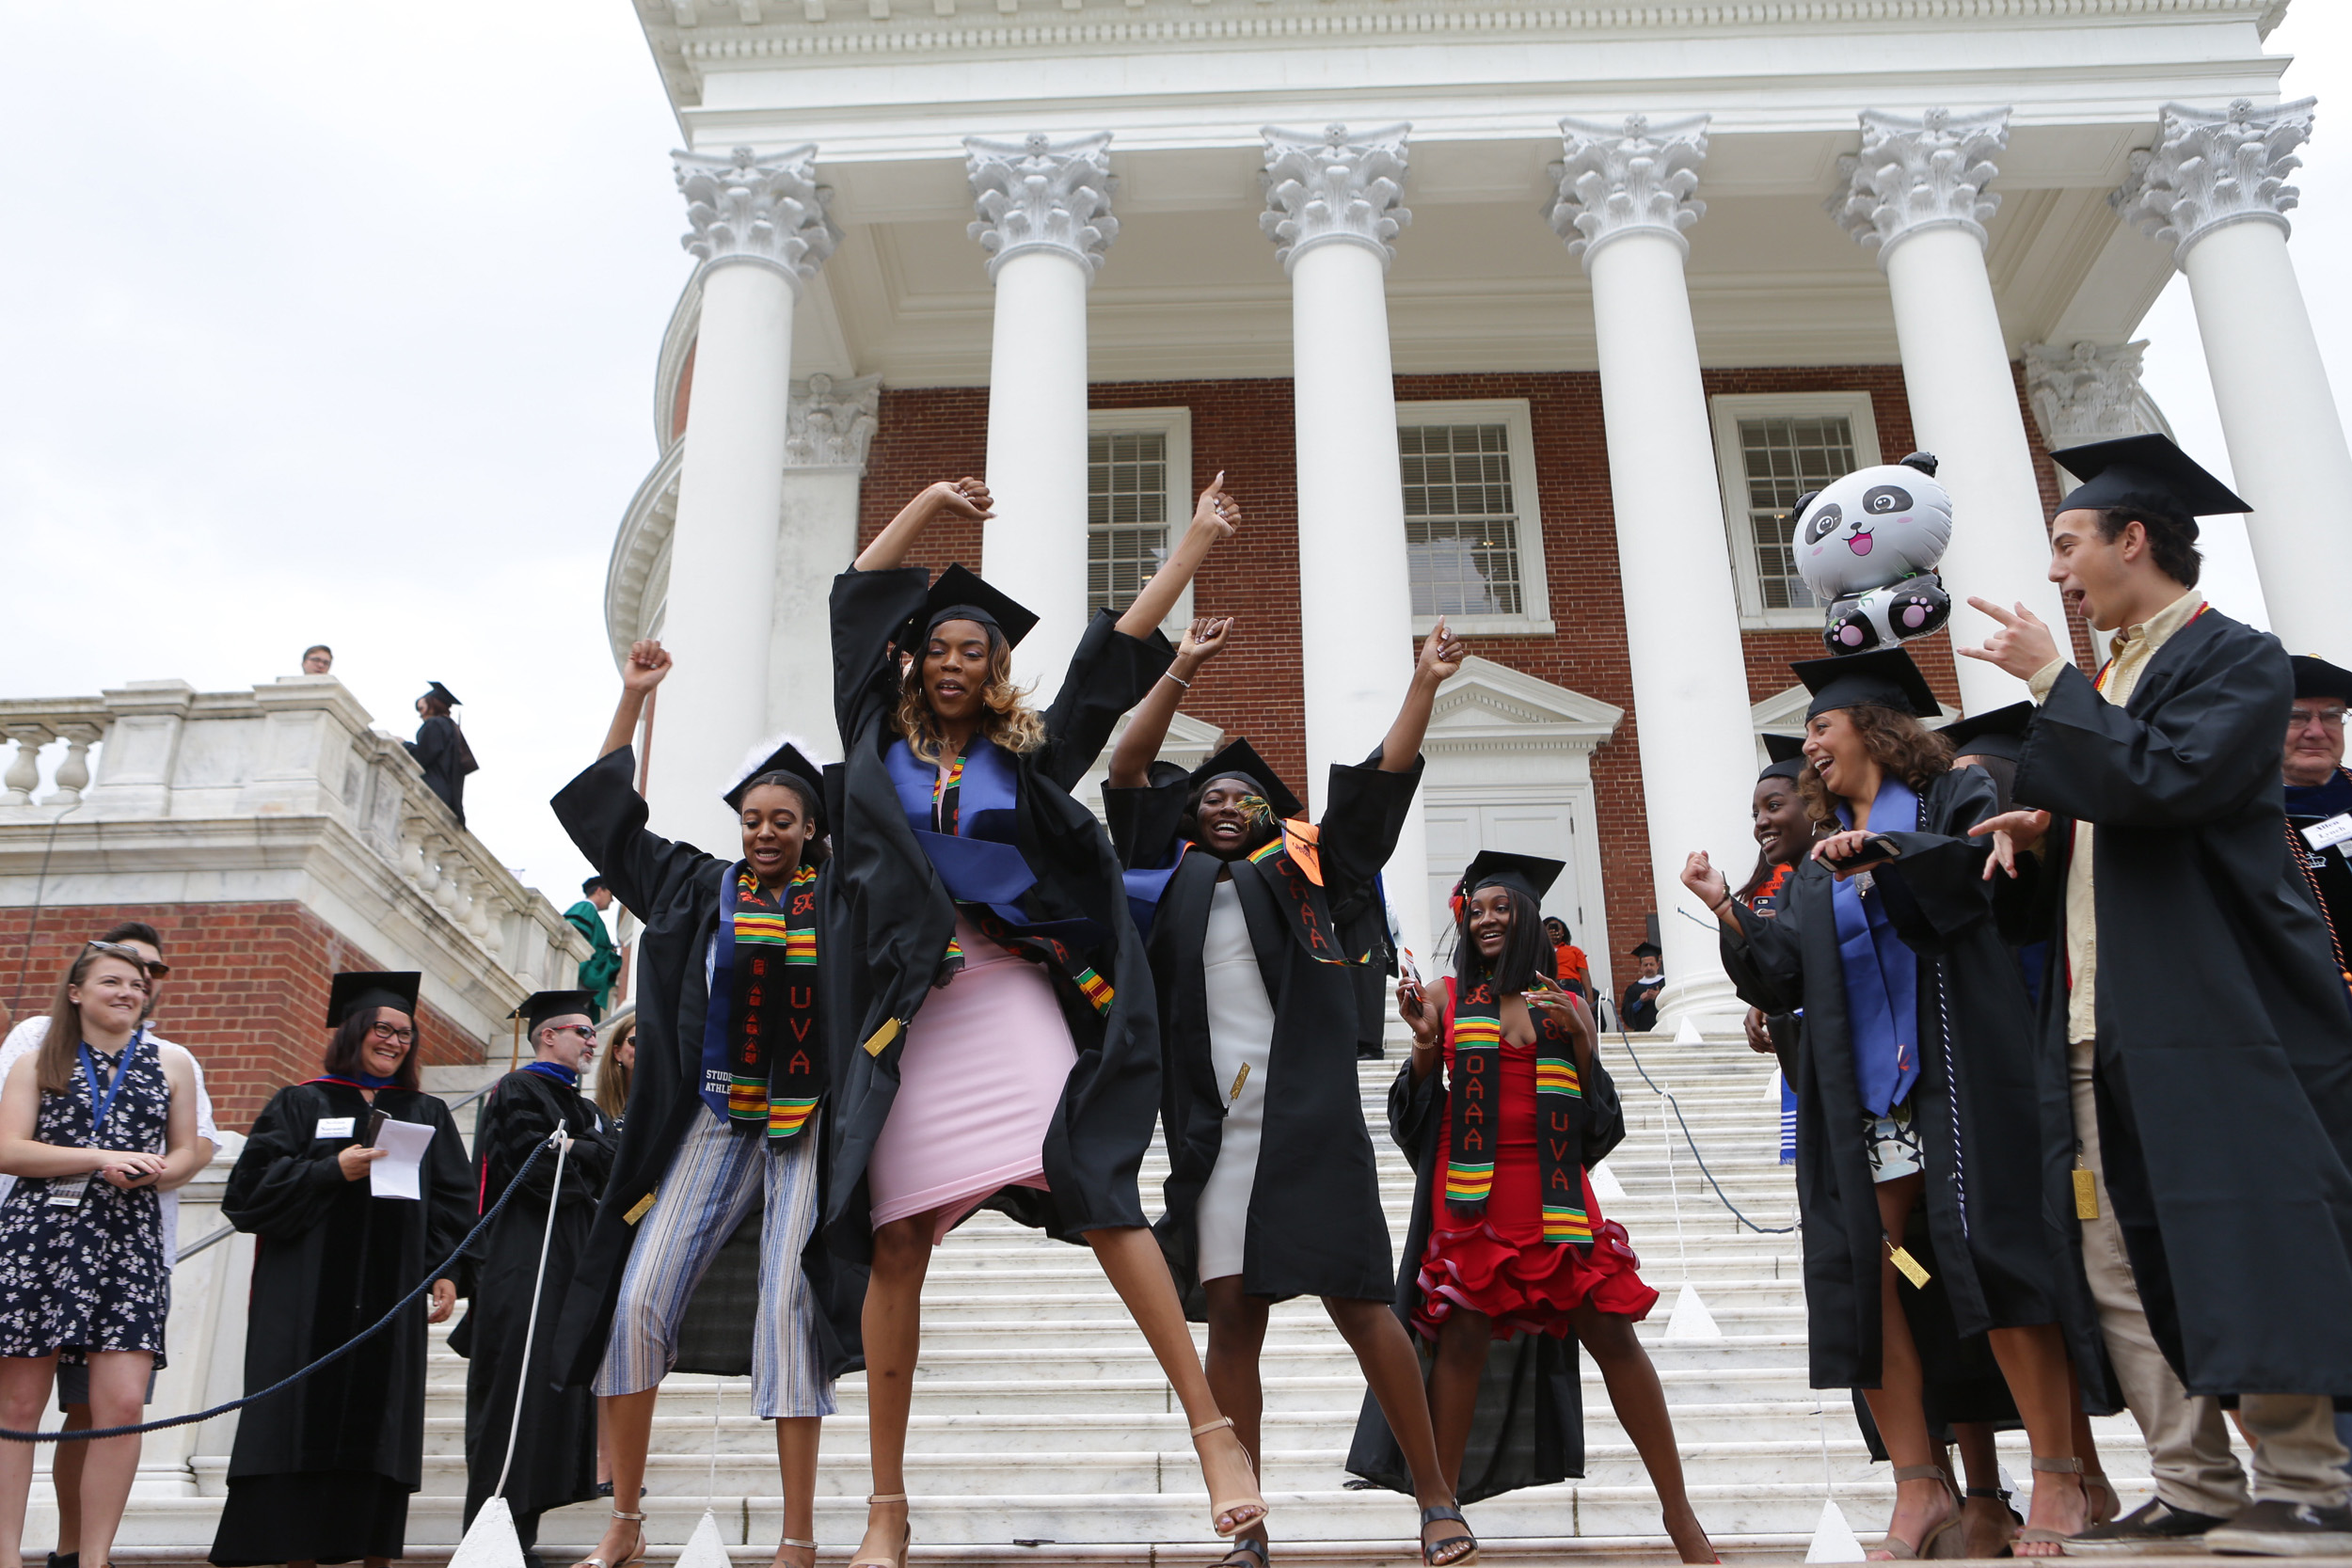 Students dance together in front of the Rotunda